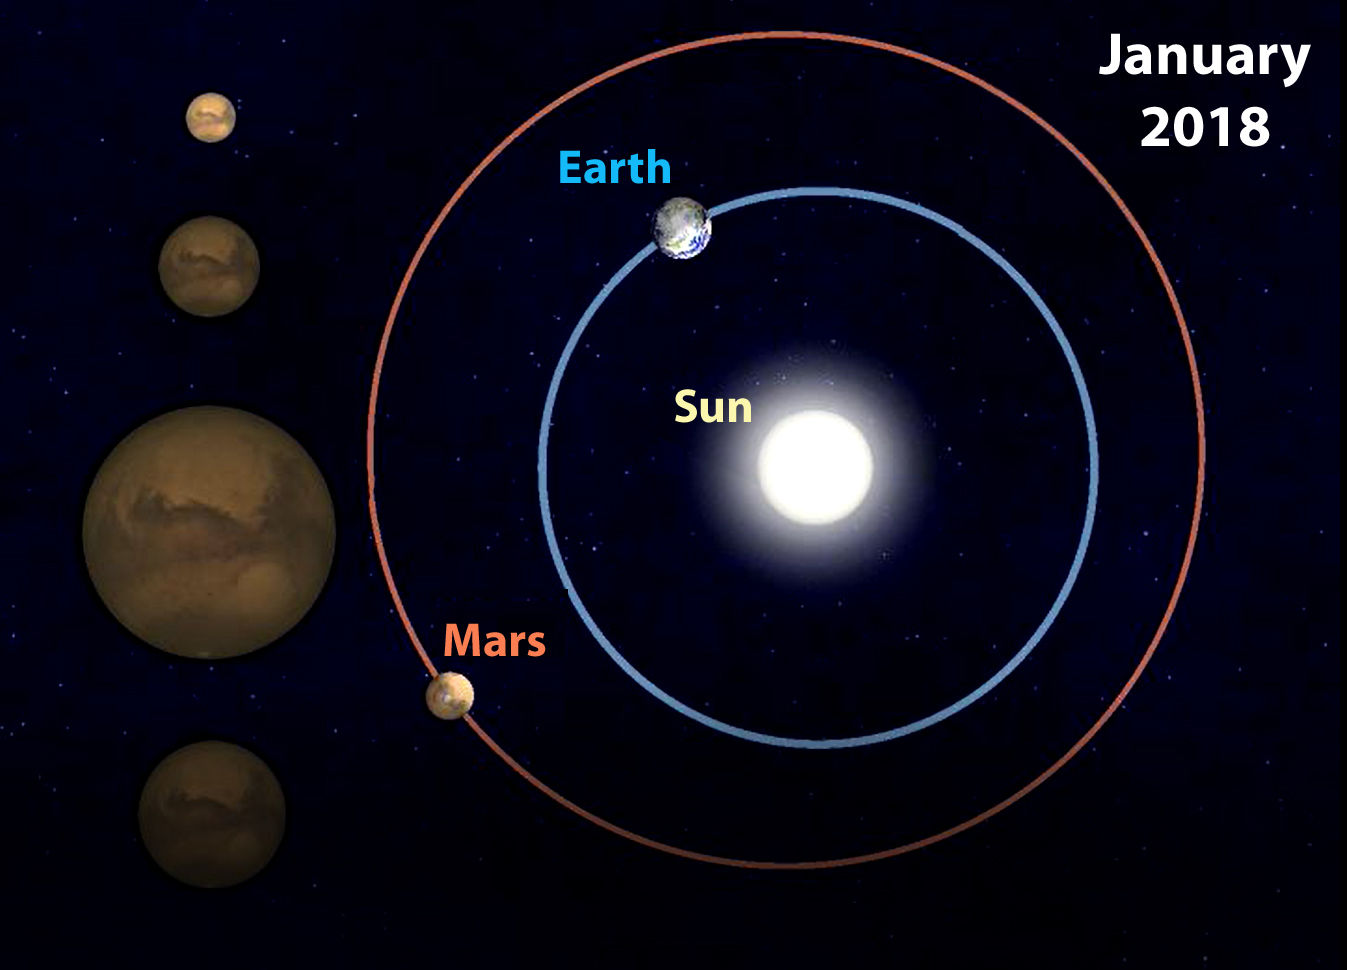 From SkyandTelescope.com: "Six months ago, Earth and Mars were 150 million miles (240 million km) apart. Seen through a telescope, Mars had the appearance of the tiny disk seen highlighted at upper left." (Sky & Telescope)